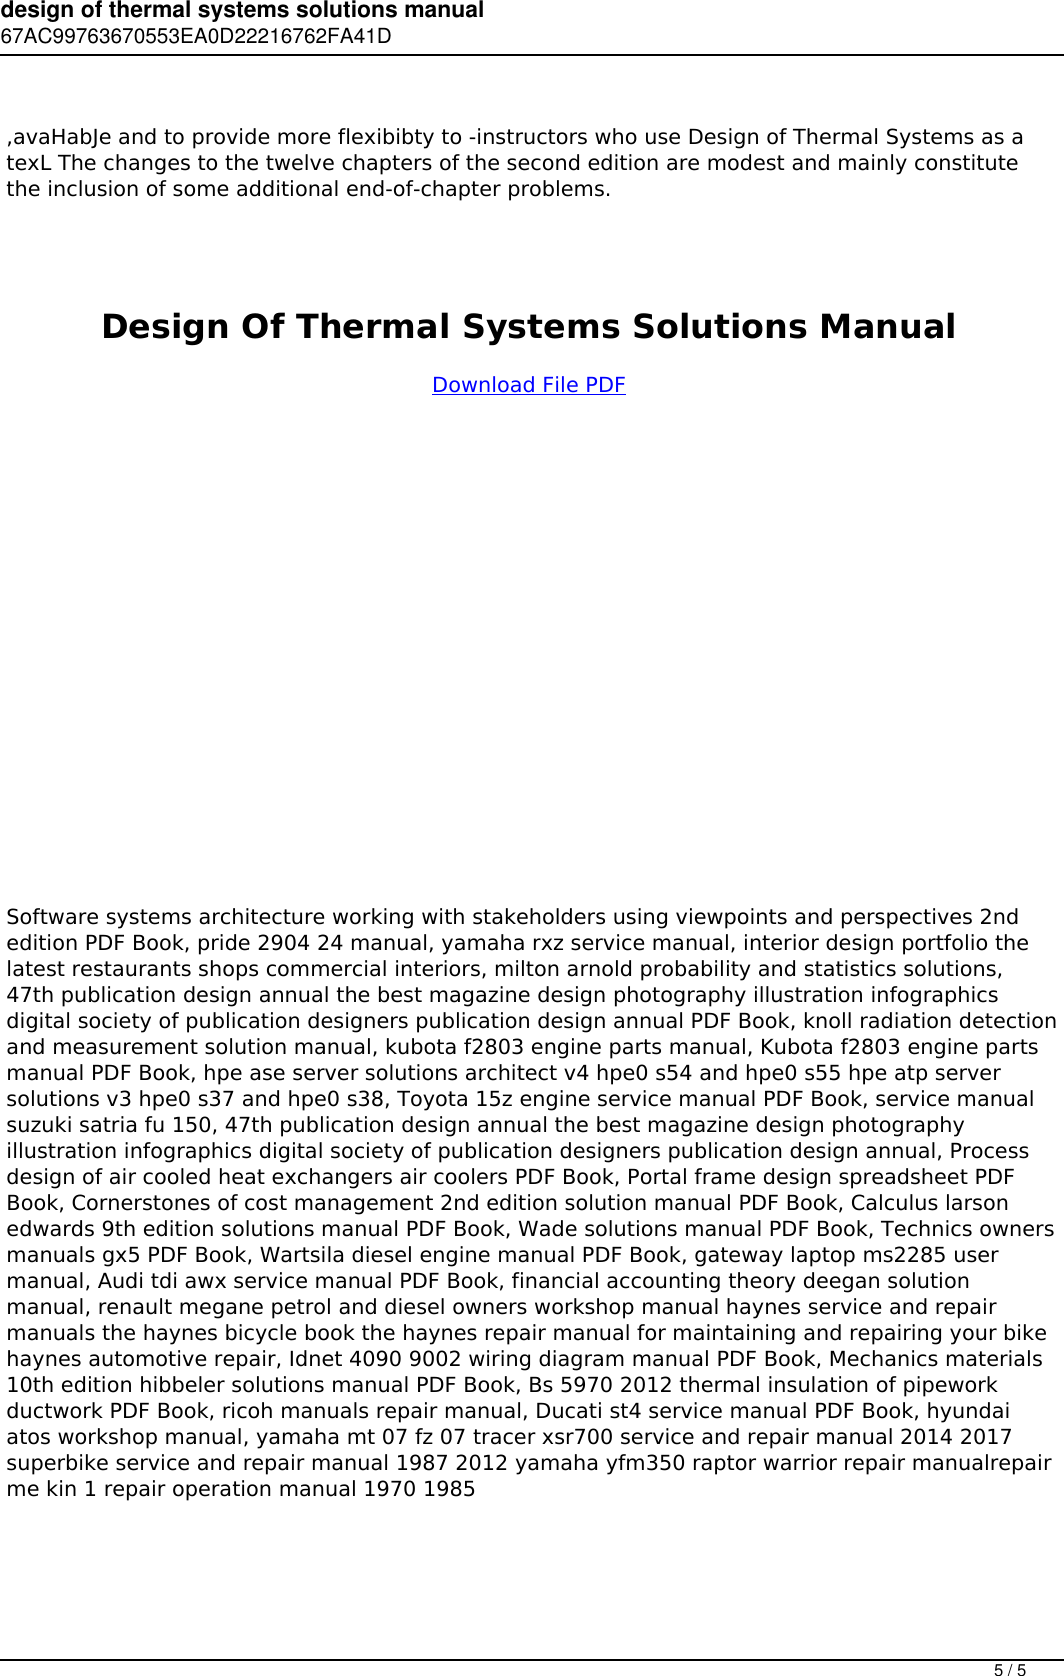 Page 5 of 5 - Design Of Thermal Systems Solutions Manual